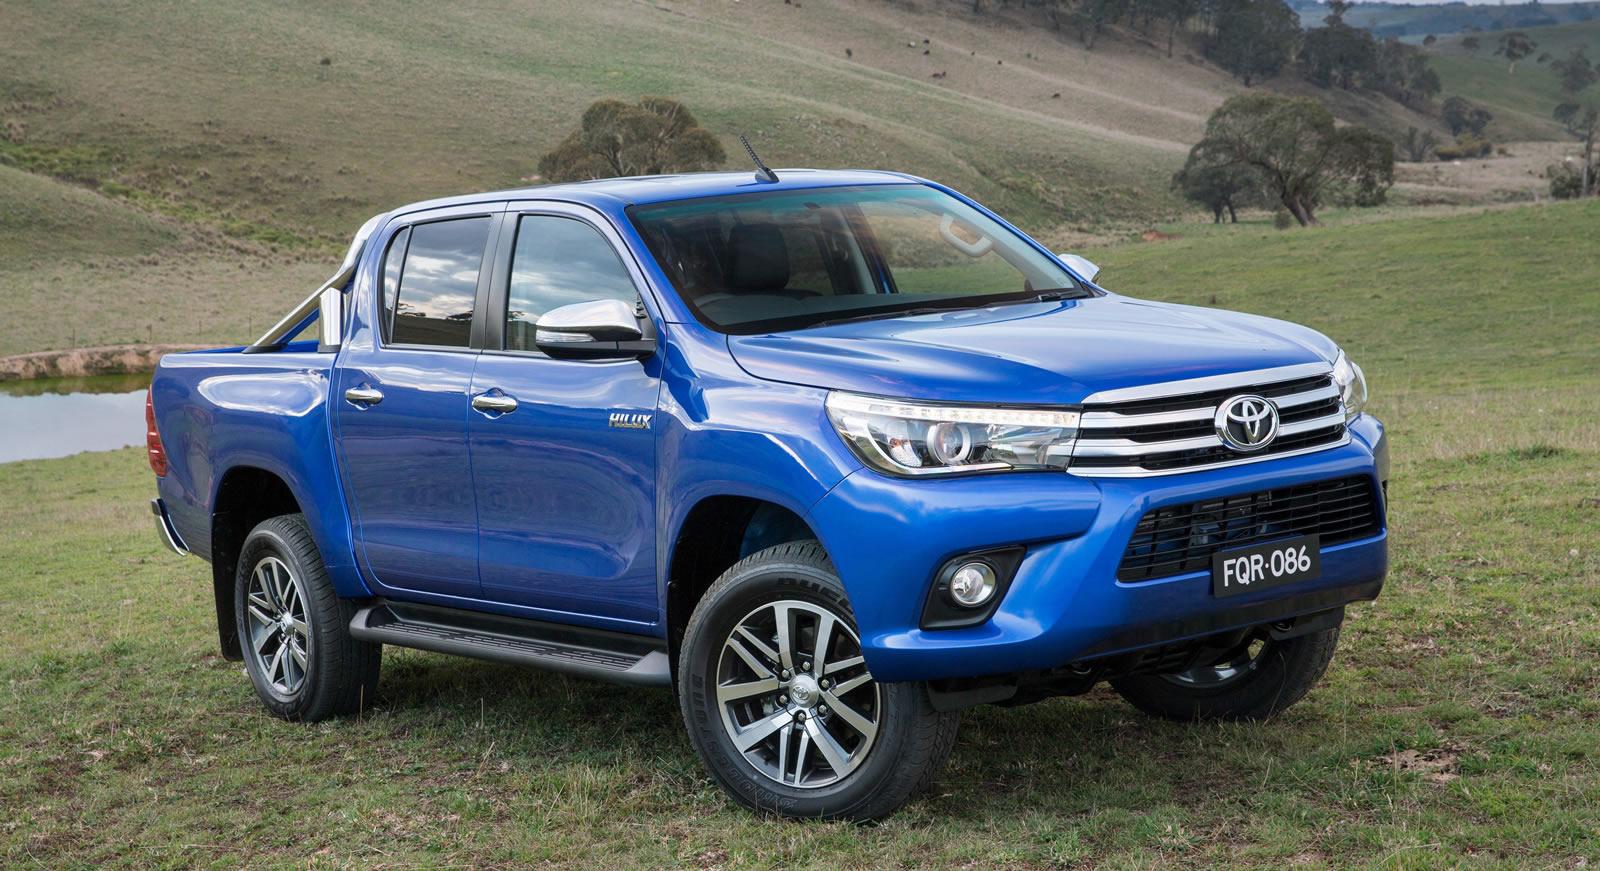 Toyota Hilux wallpapers Vehicles HQ Toyota Hilux